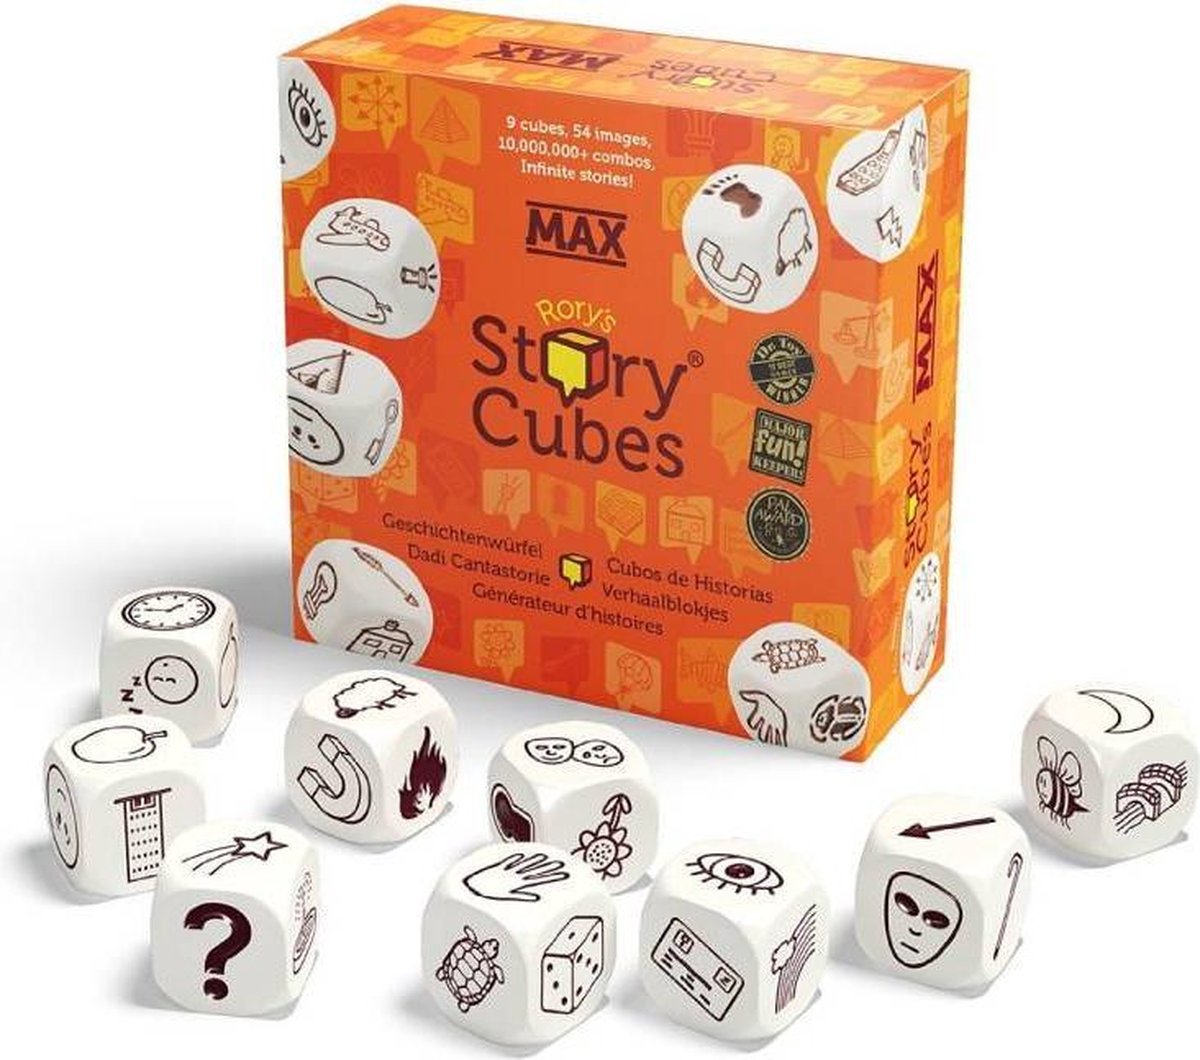 Rory's Story Cubes MAX (Classic) | Games |